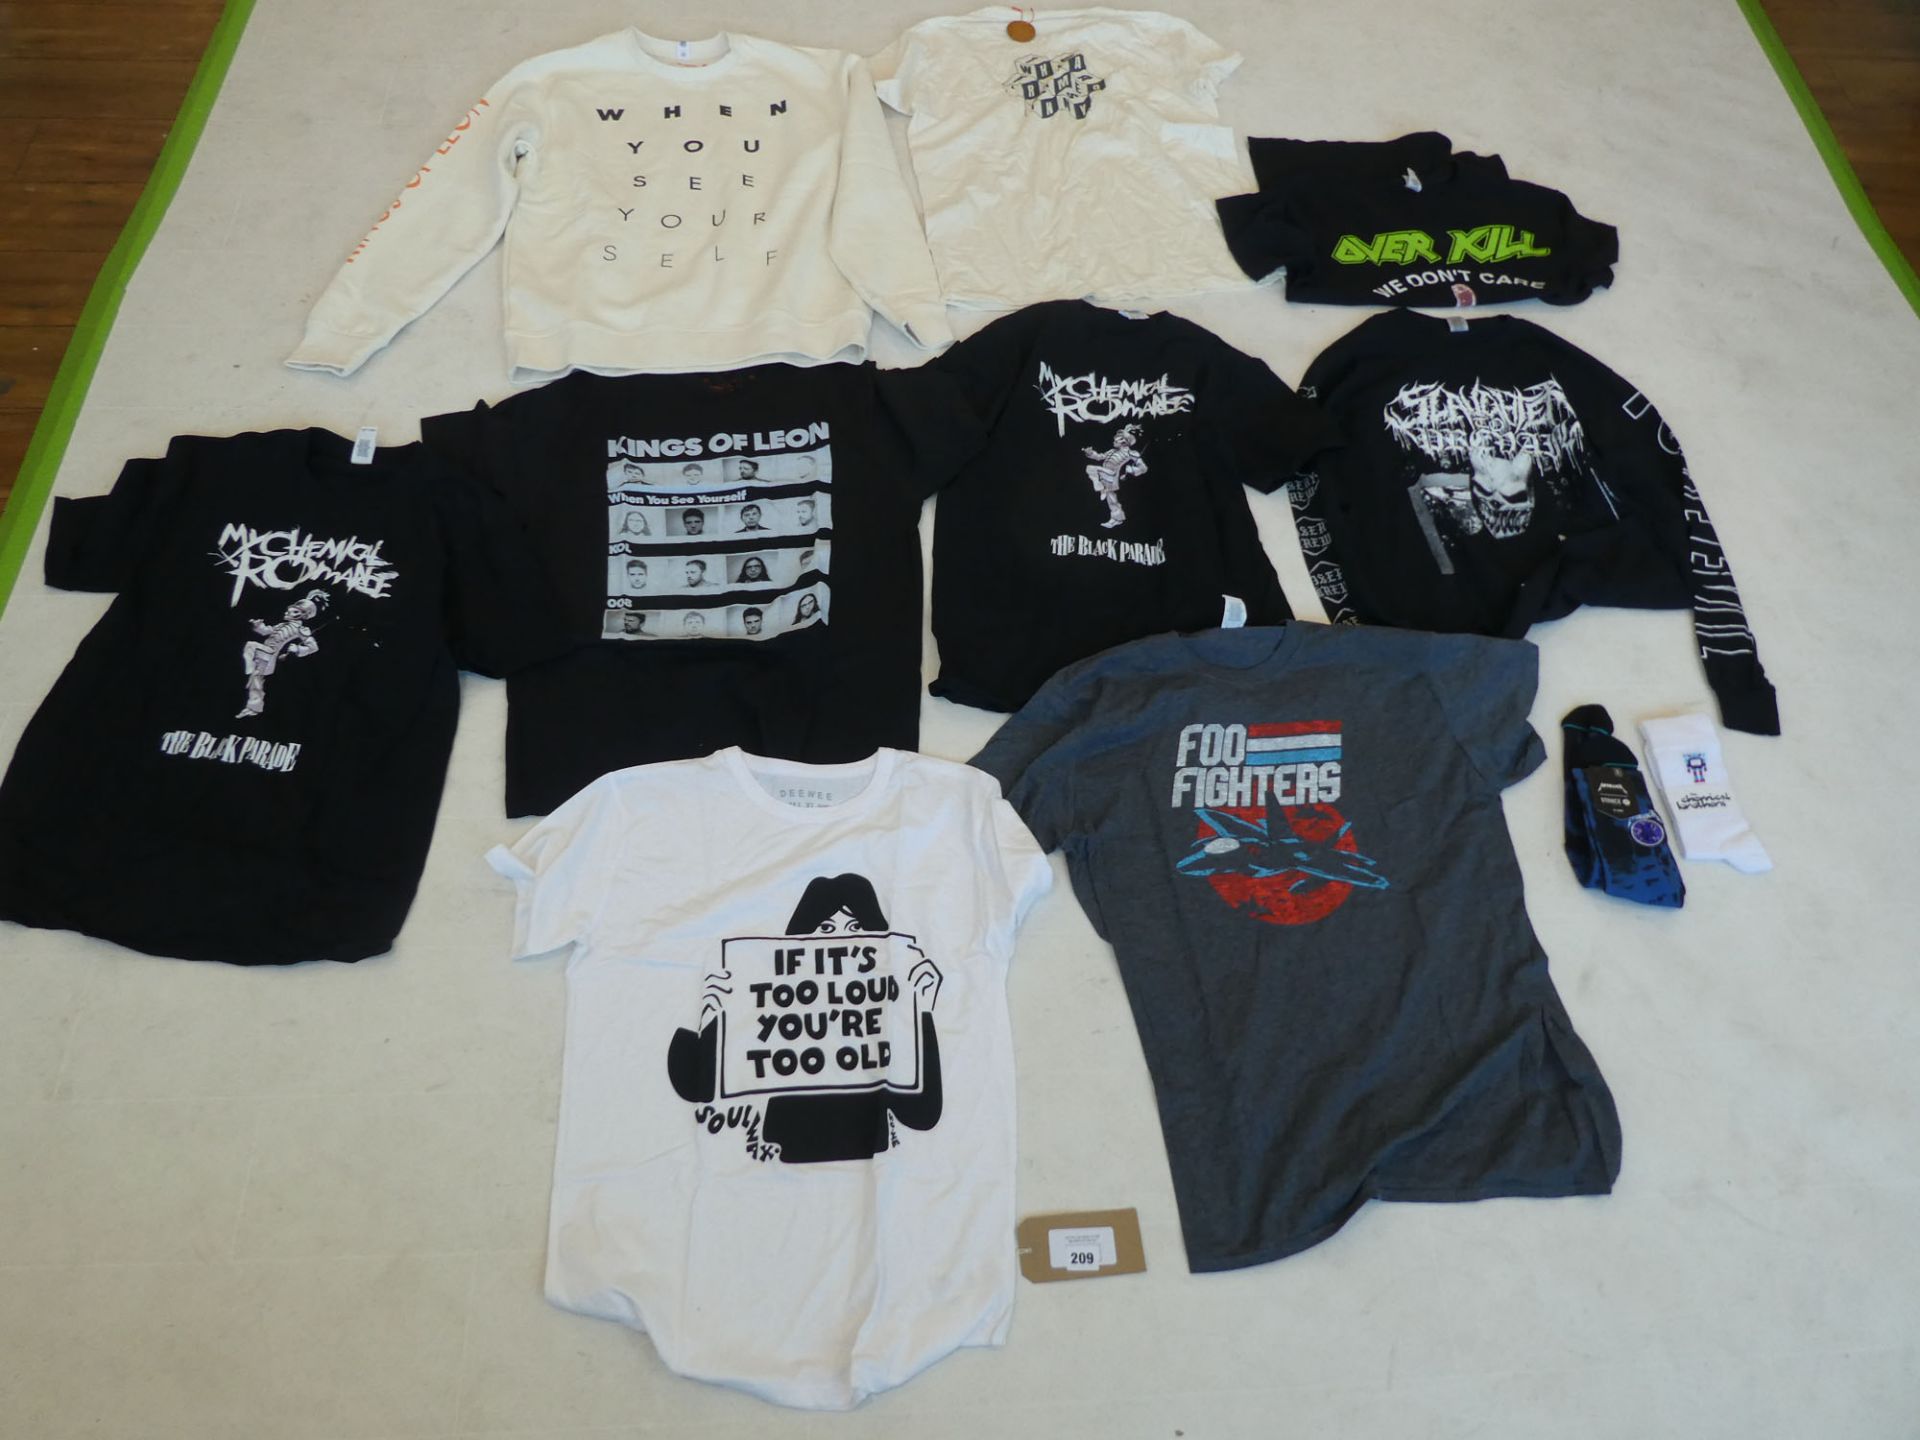 Rock shirts and socks including Metallica and Chemical Brothers socks, and Overkill, Foo Fighters,